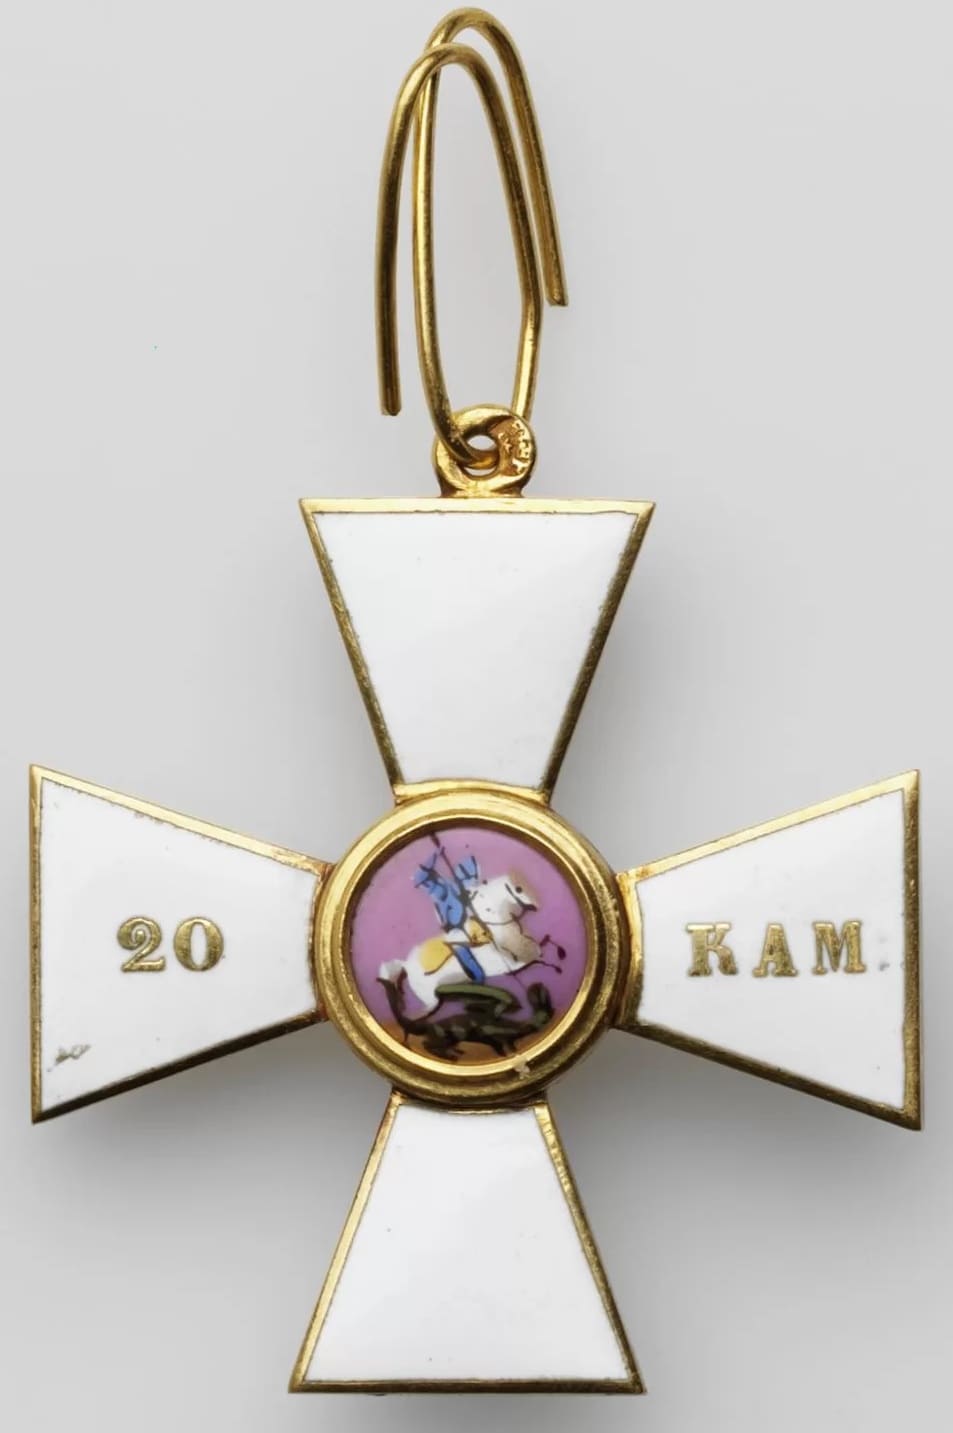 Exemplary 4th class Order of Saint George for 20 Campaigns.jpg